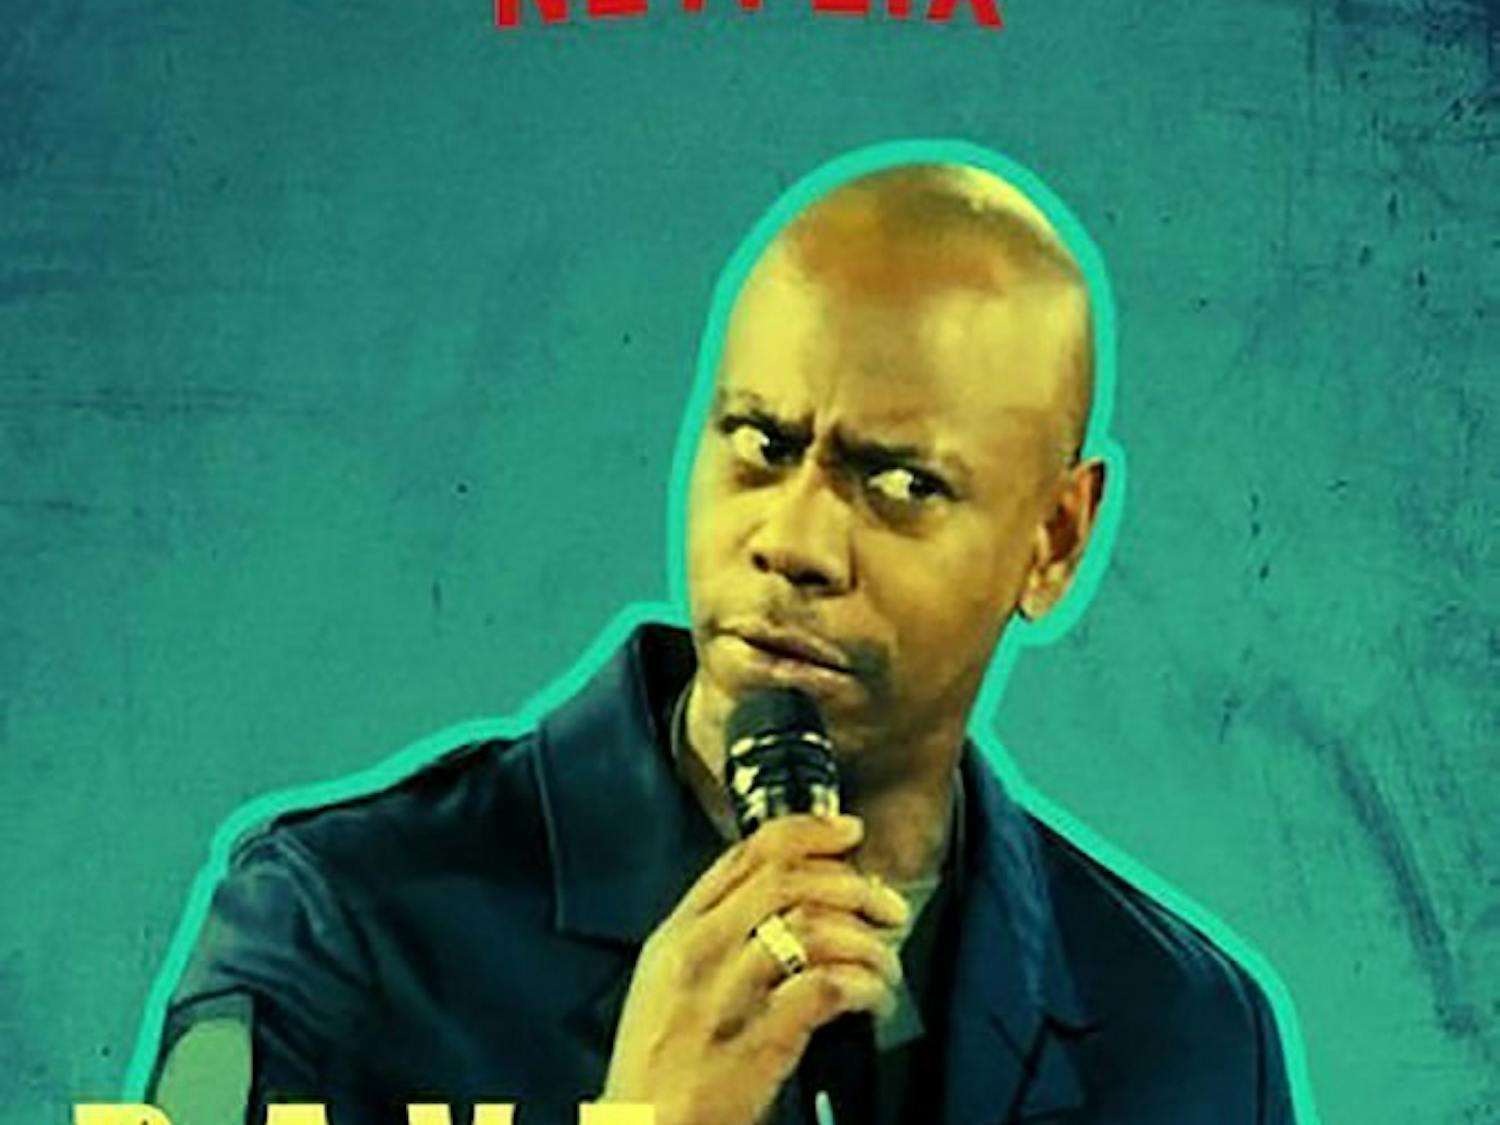 After a ten-year TV hiatus, Dave Chapelle has returned with a new set of Netflix specials.